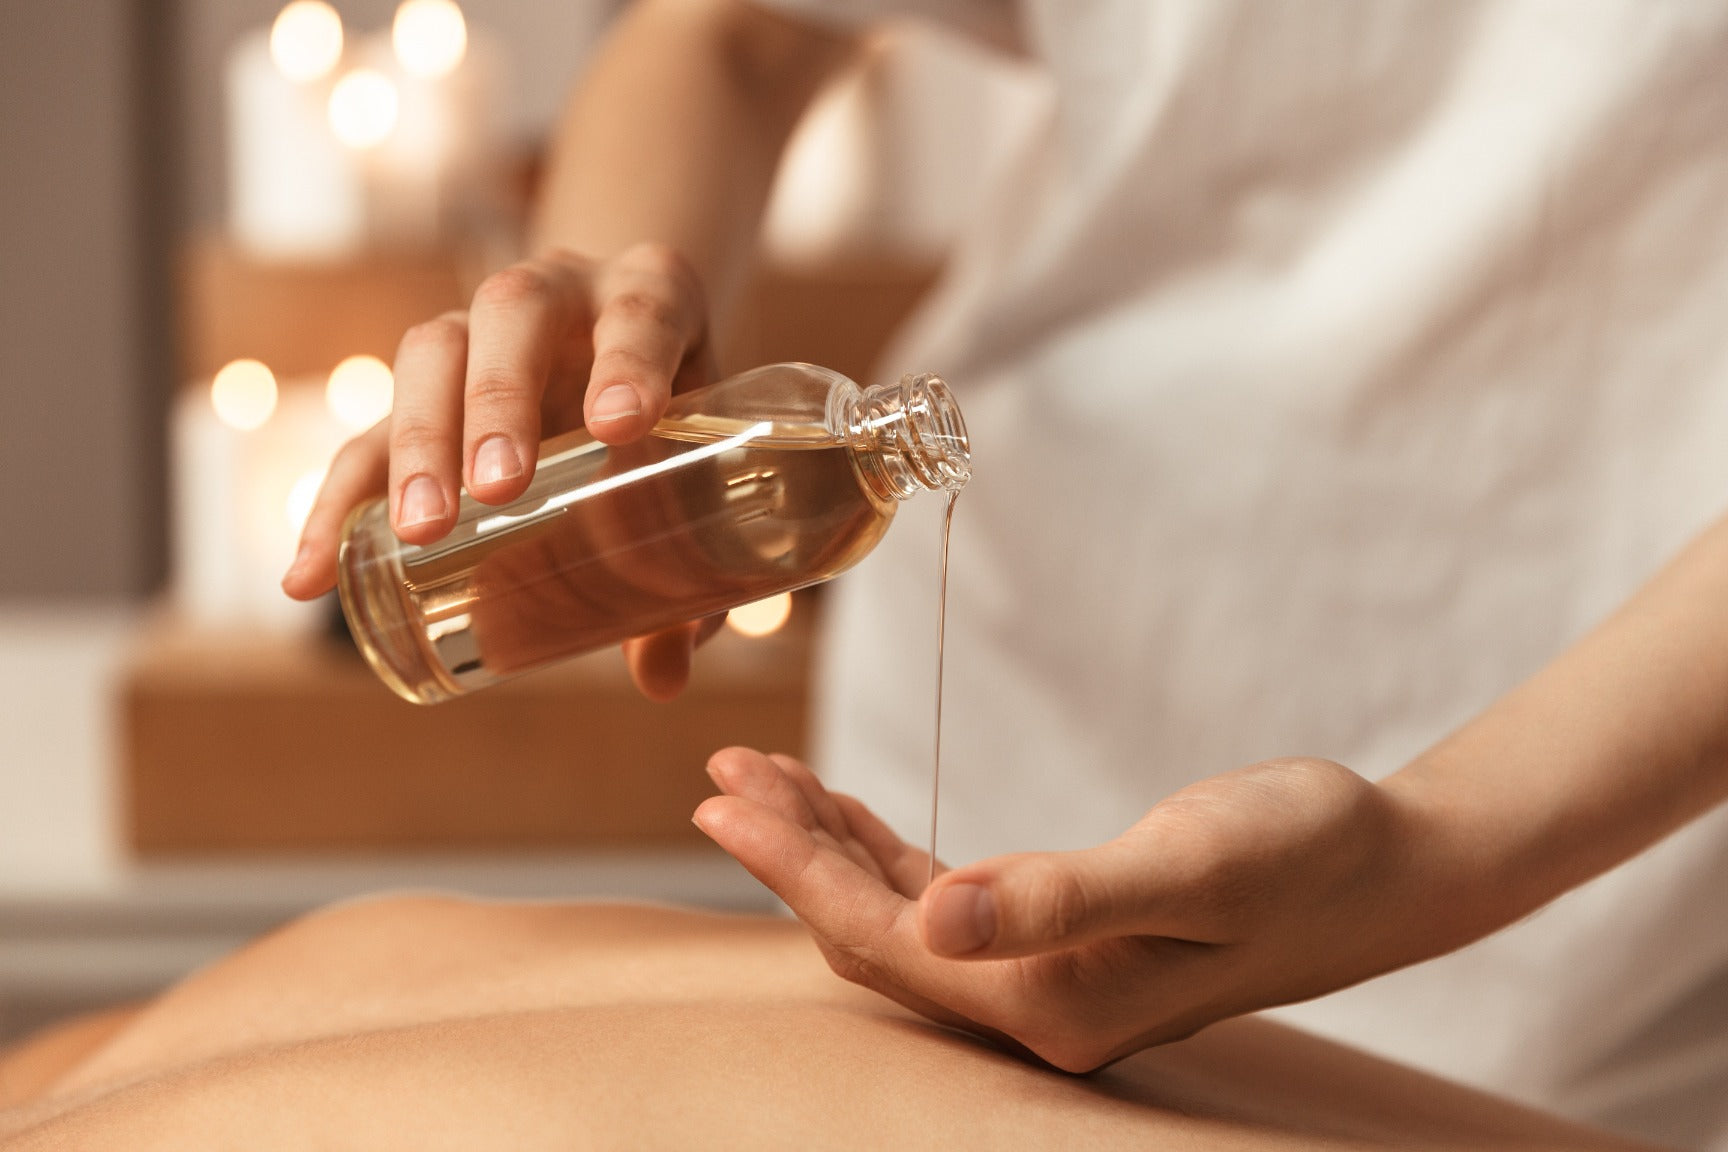 How to Choose The Right Body Massage Oil